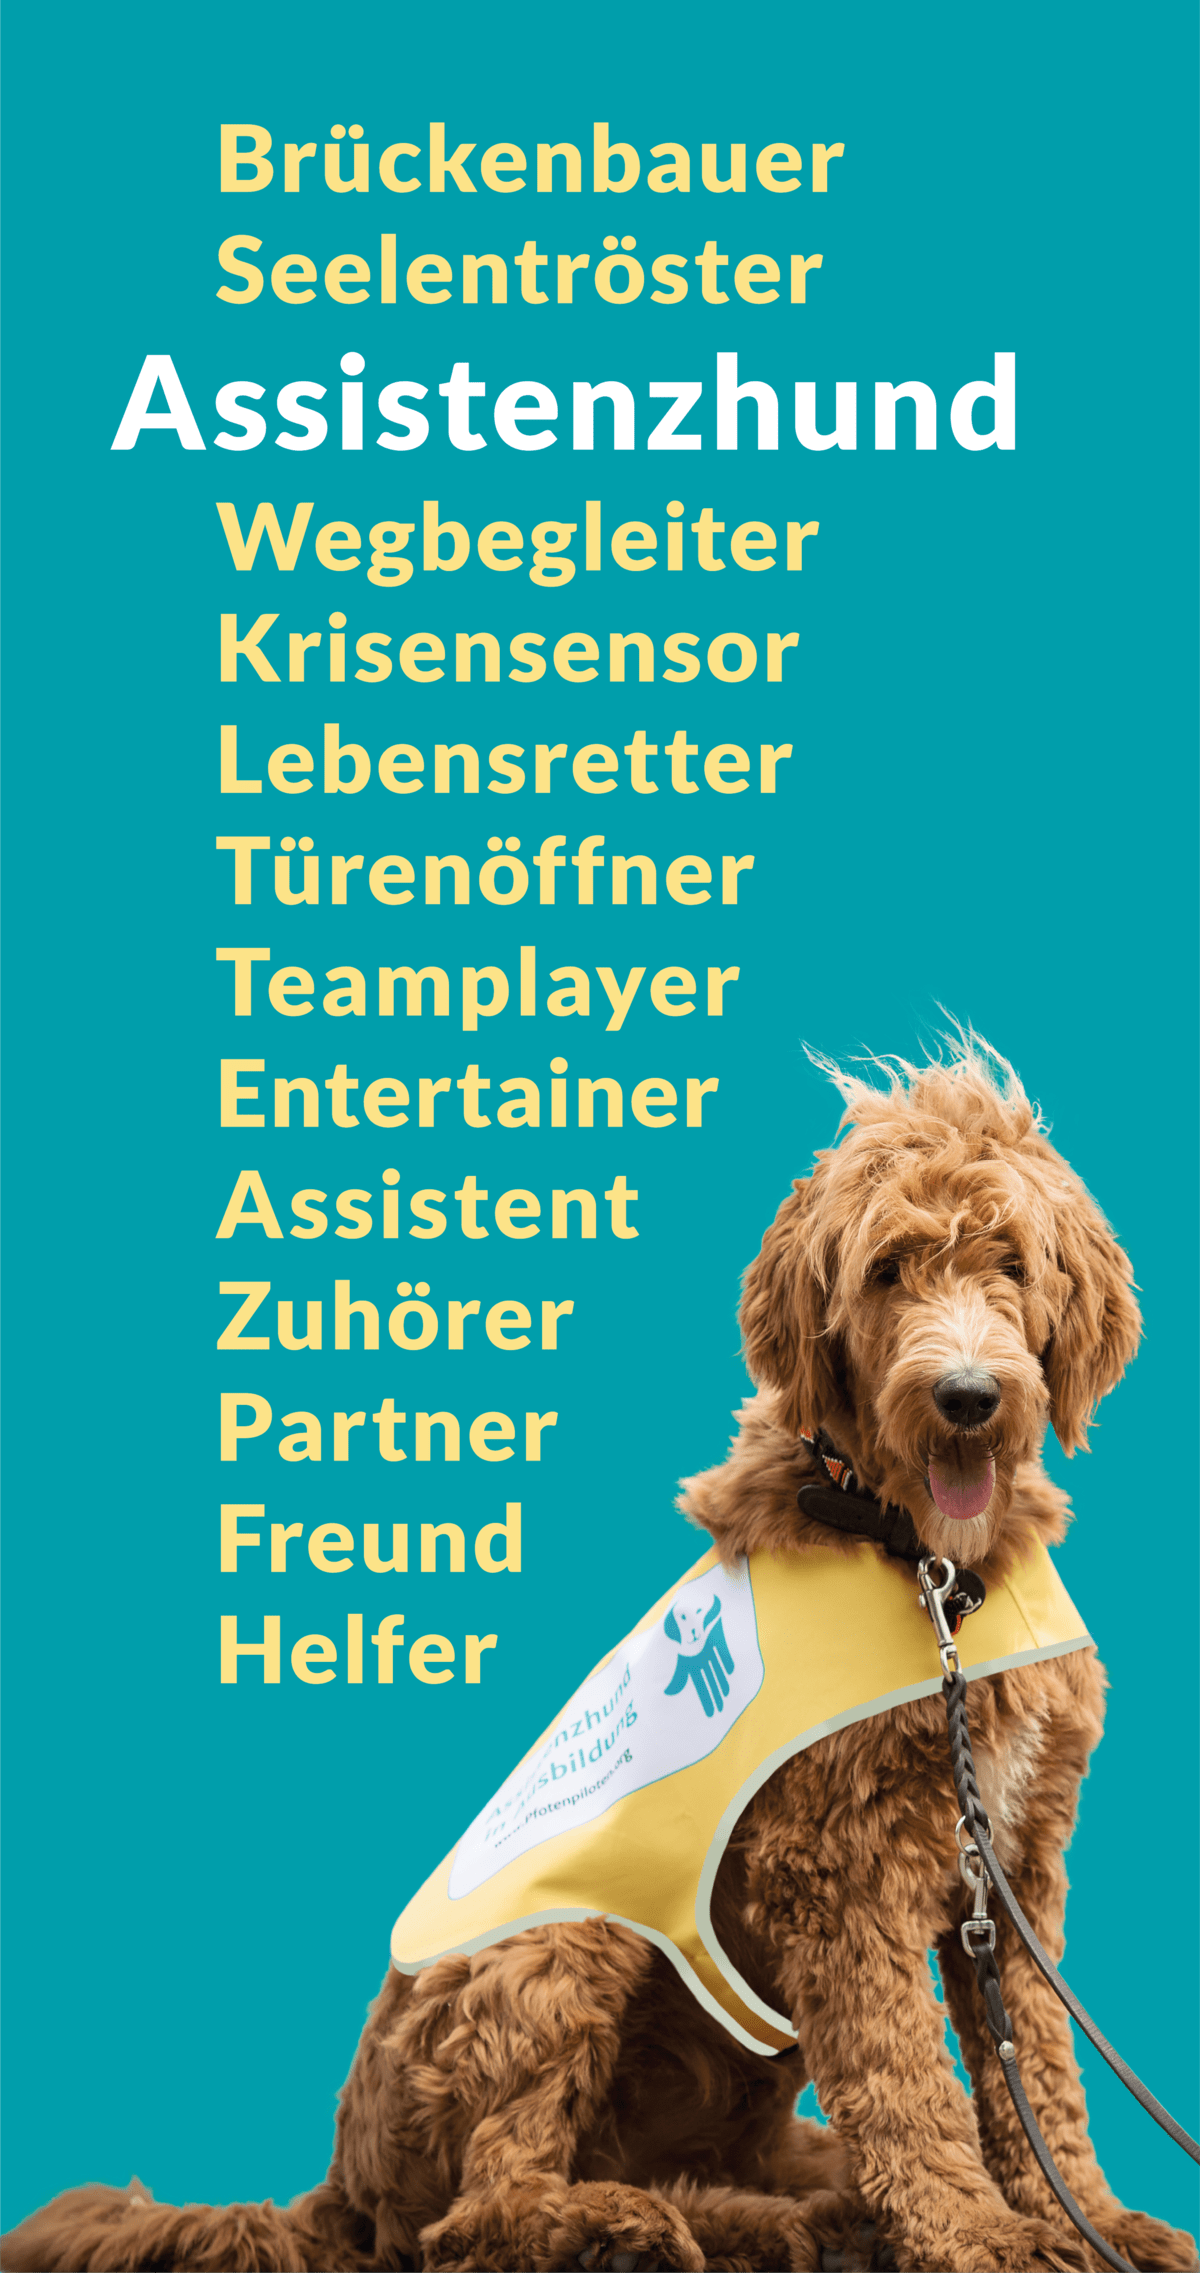 Graphic Assistance Dog Synonyms :: Above and next to a light brown, shaggy Labradoodle assistance dog the following synonyms along with the word 